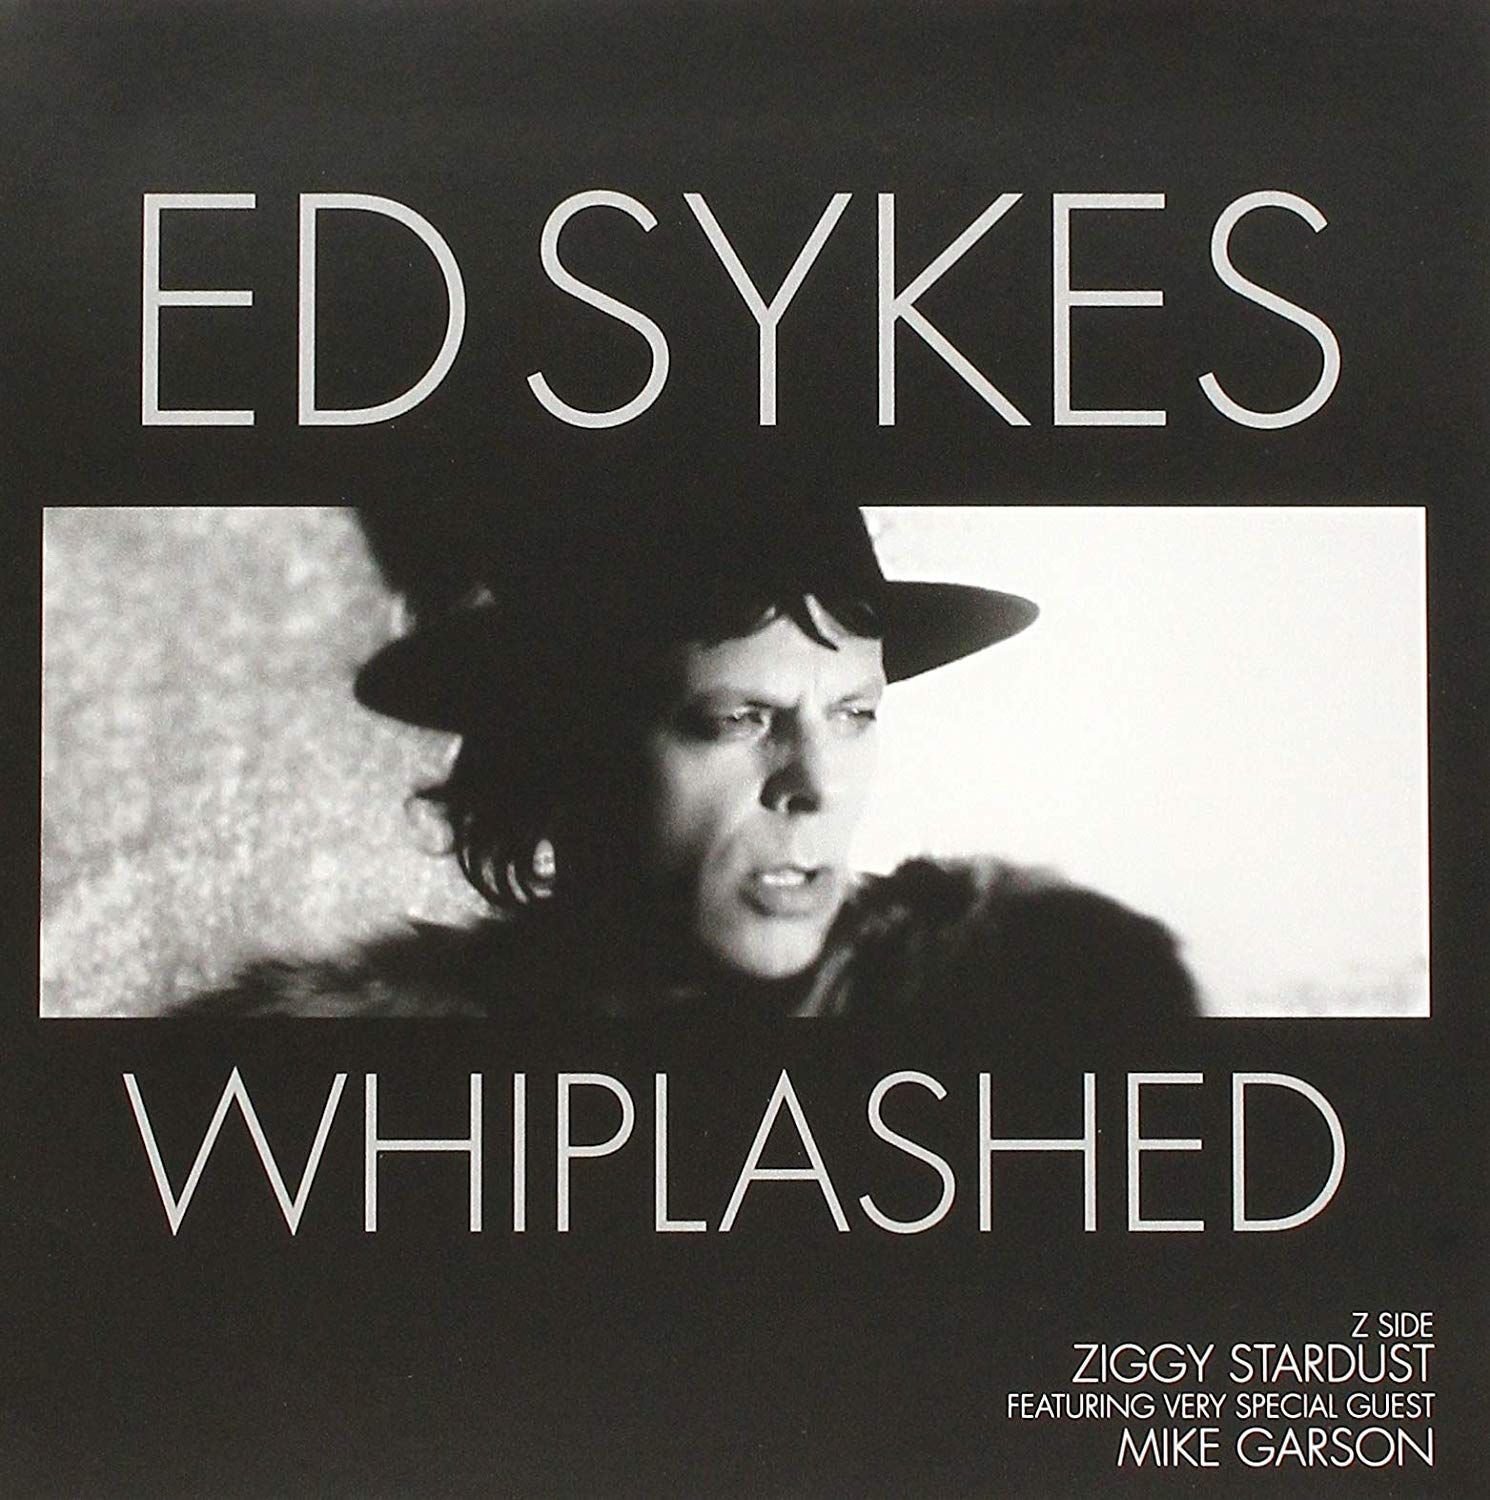 Disco in vinile Ed Sykes - Whiplashed B/W Ziggy Stardust (Numbered) (Limited Edition) (7" Vinyl)